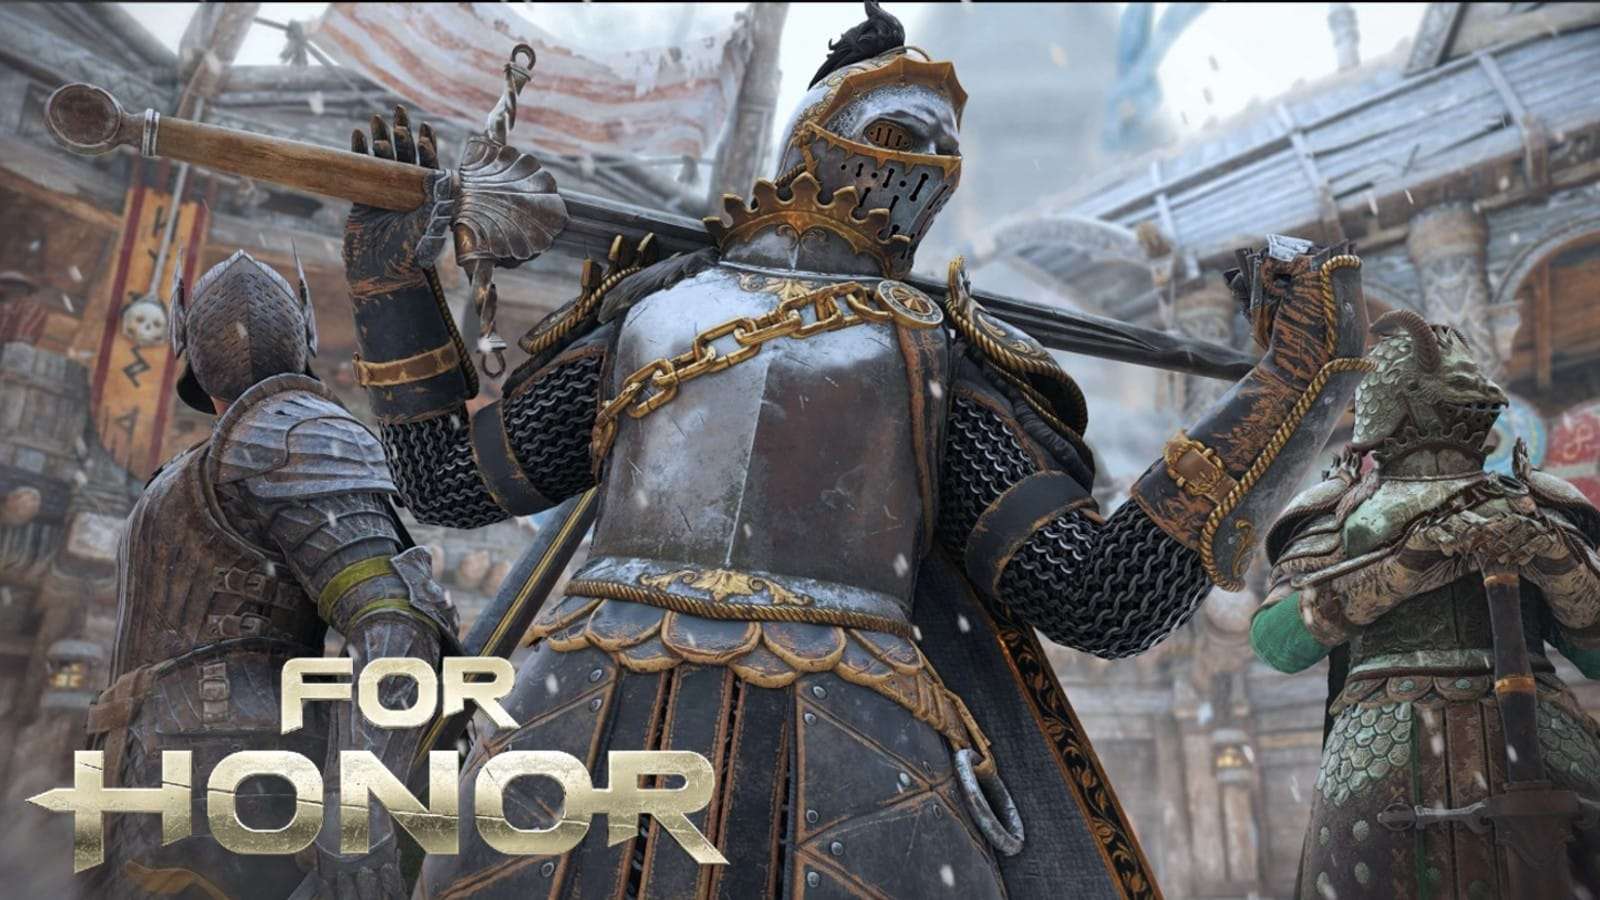 For Honor player count